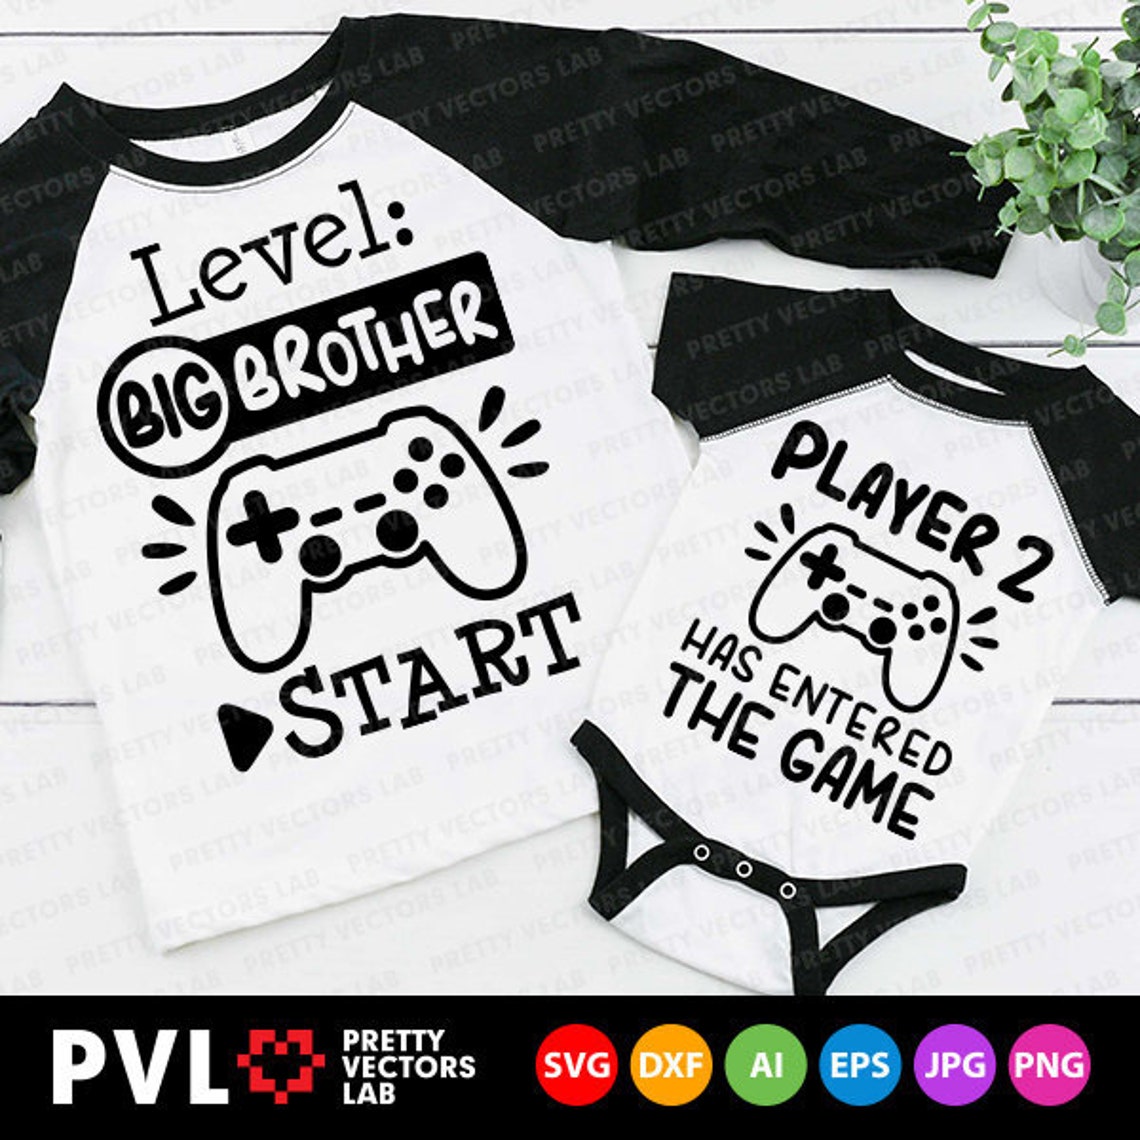 Big Brother Svg Leveled up Cut Files Player 2 Has Entered - Etsy